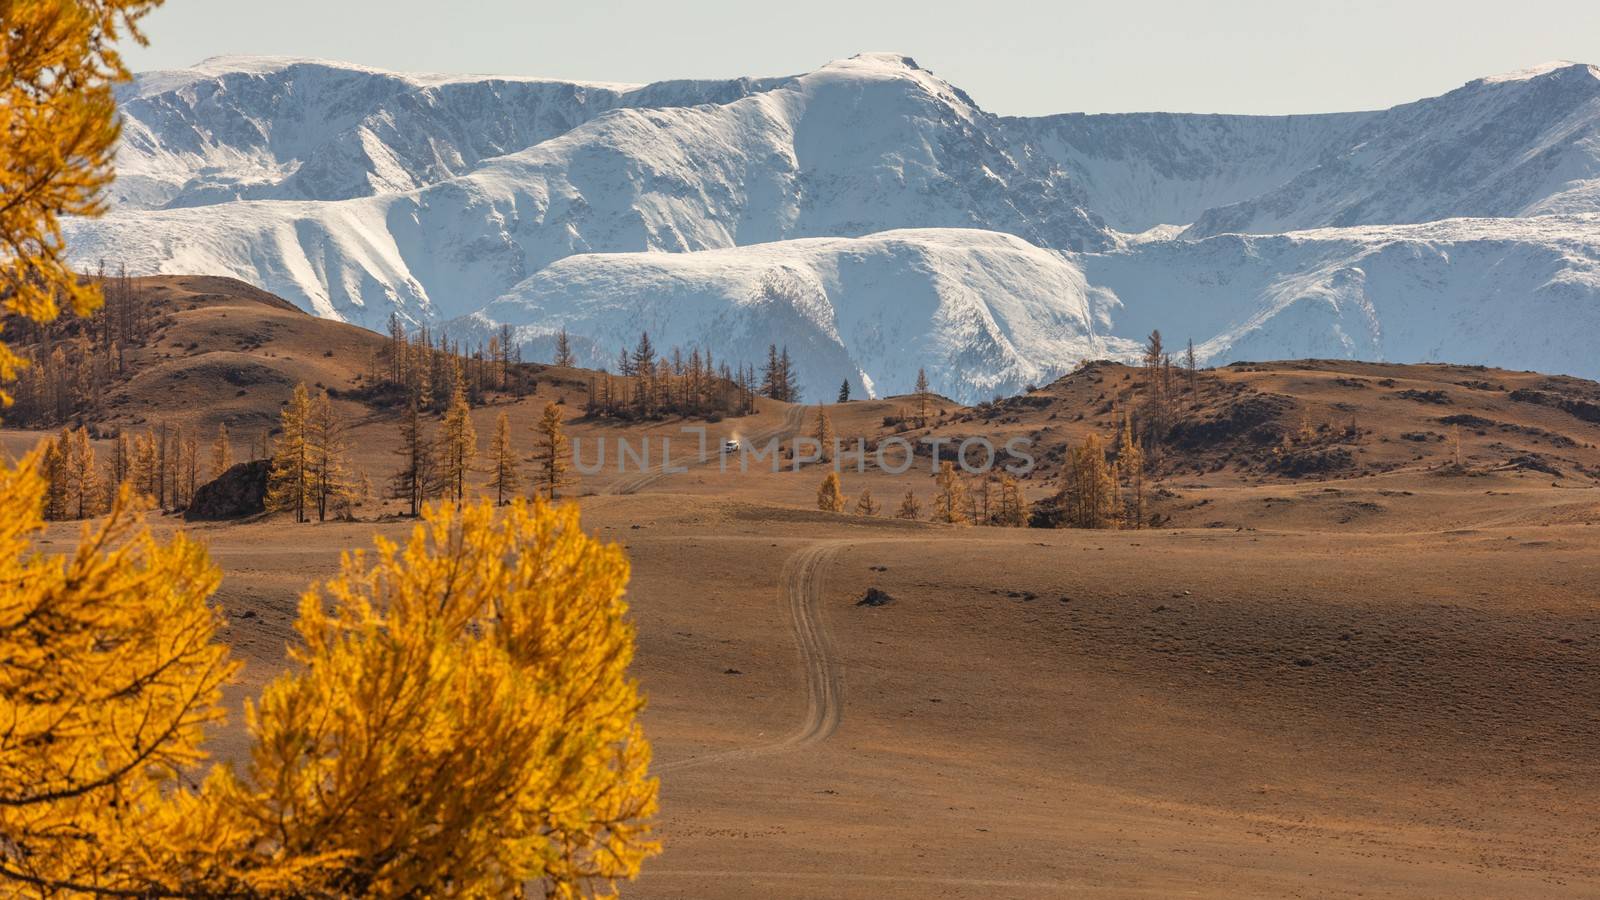 Scenic high angle view of a valley with an off-road vehicle moving in it. White snowy mountain ridge as a background. Golden tree in the foreground out of focus. Altai mountains, Siberia, Russia.